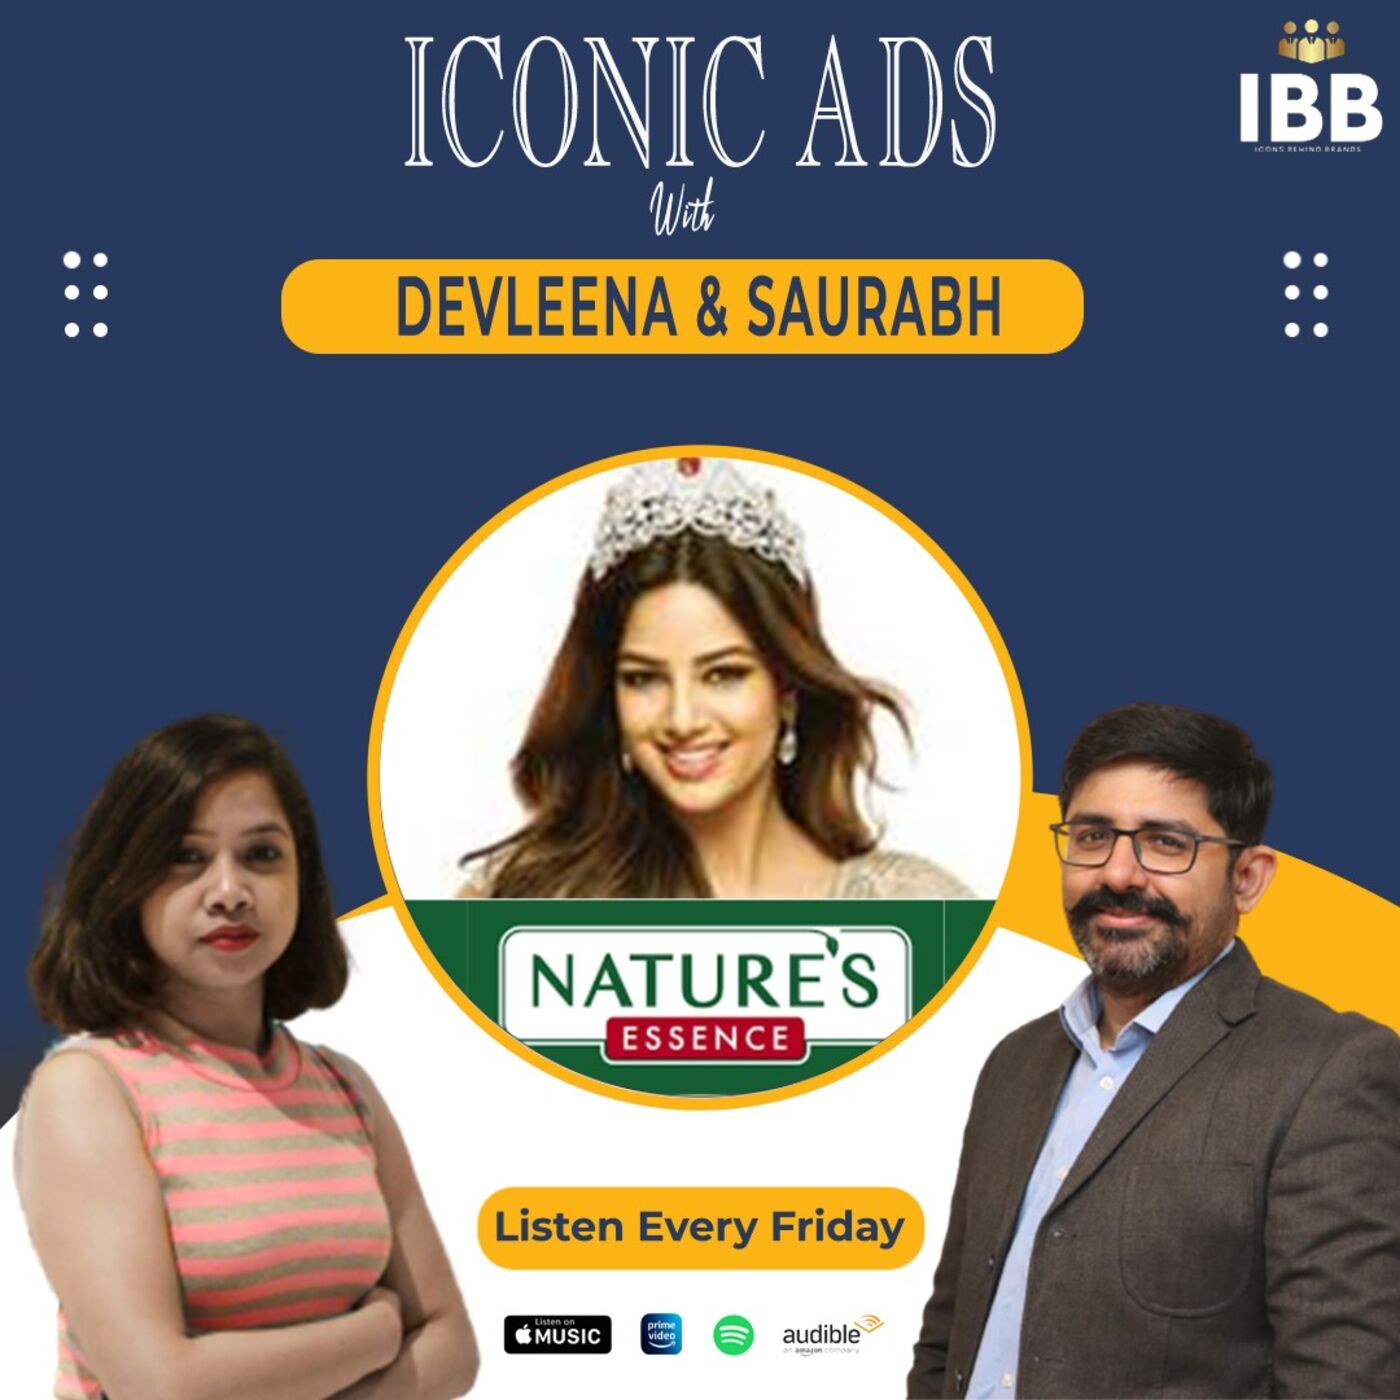 Iconic ads with Devleena and Saurabh Nature essence ads